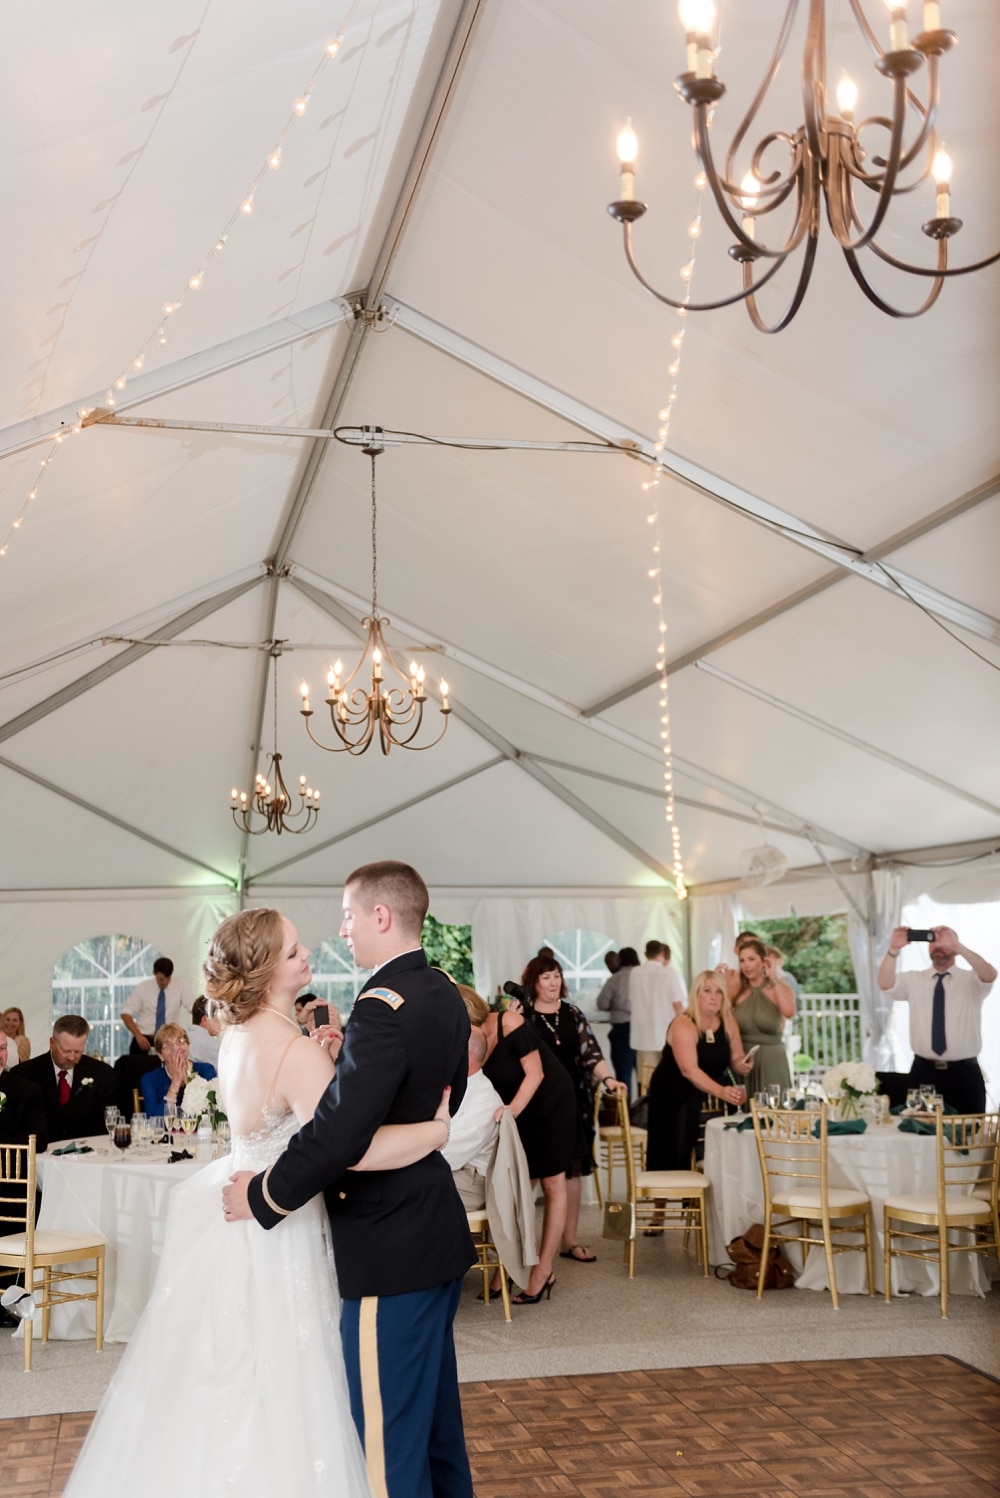 Bride and groom during first dance at reception at Rust Manor House wedding